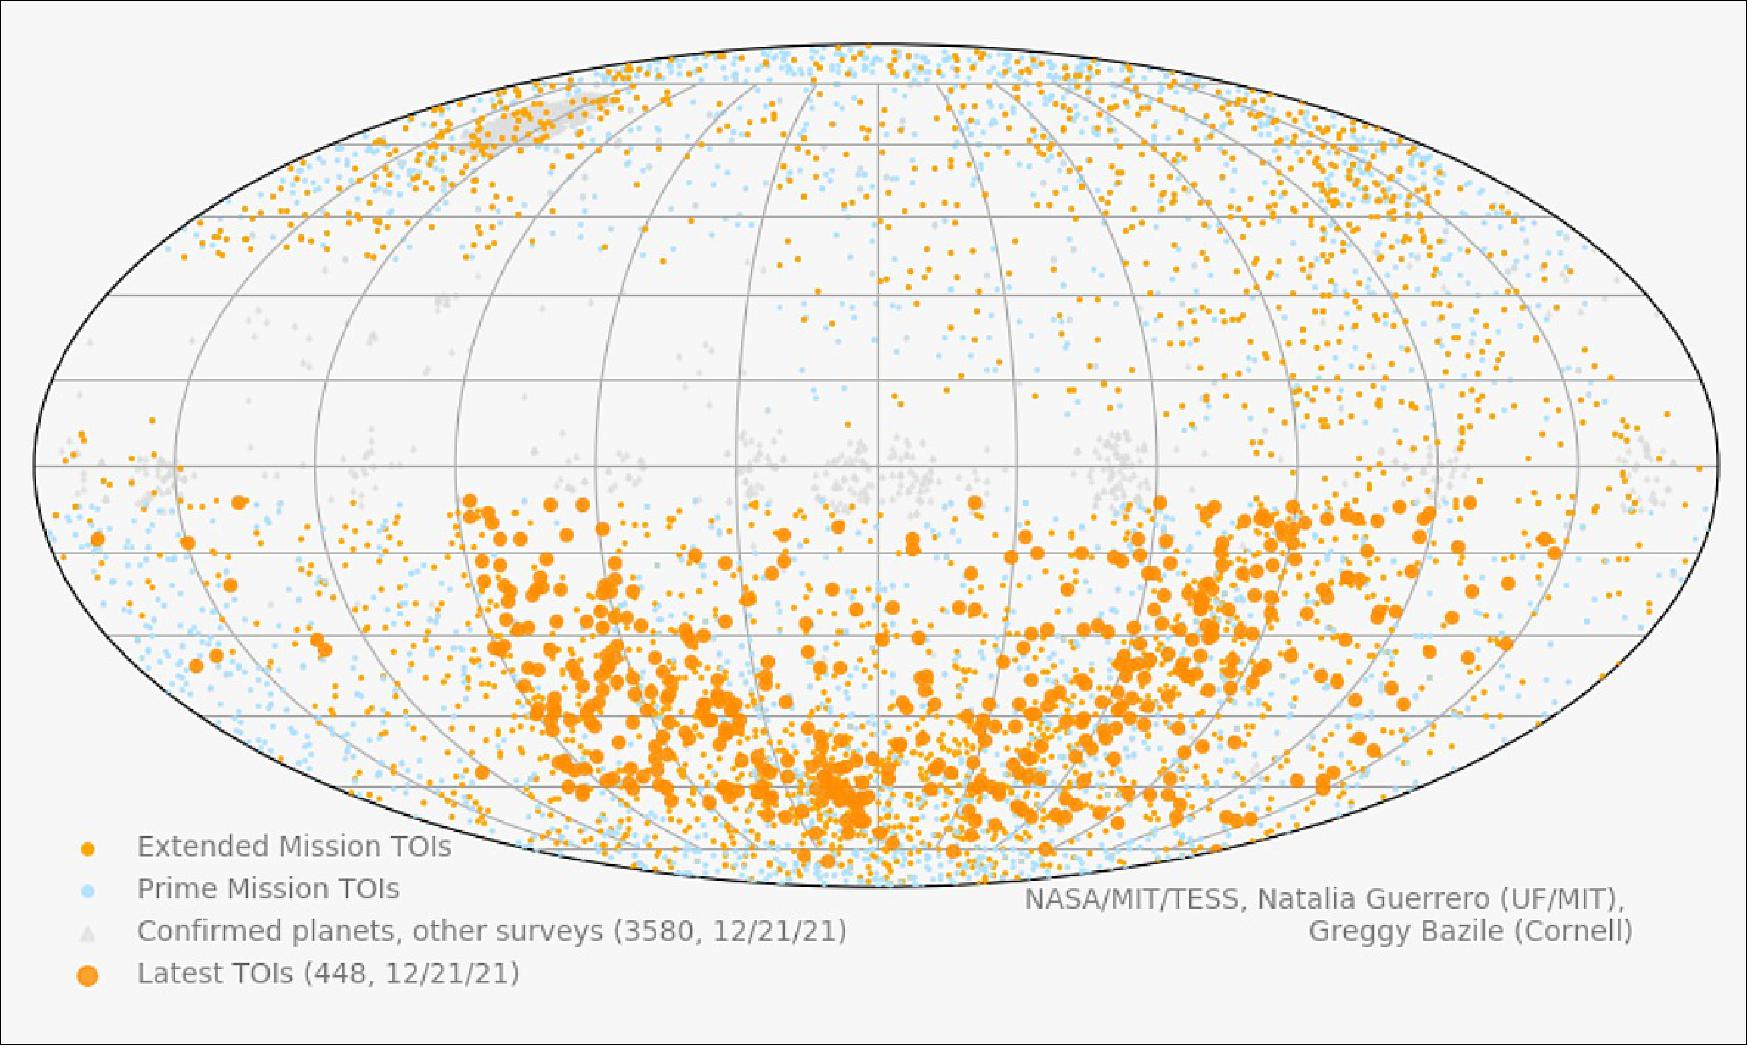 Figure 15: A map of the sky is now crowded with over 5,000 exoplanet candidates from NASA’s TESS mission. The TESS Science Office at MIT released the most recent batch of TESS Objects of Interest (large orange points on the map) on Dec. 21, boosting the catalog to this 5,000-count milestone (Credits: Image courtesy of NASA/MIT/TESS)